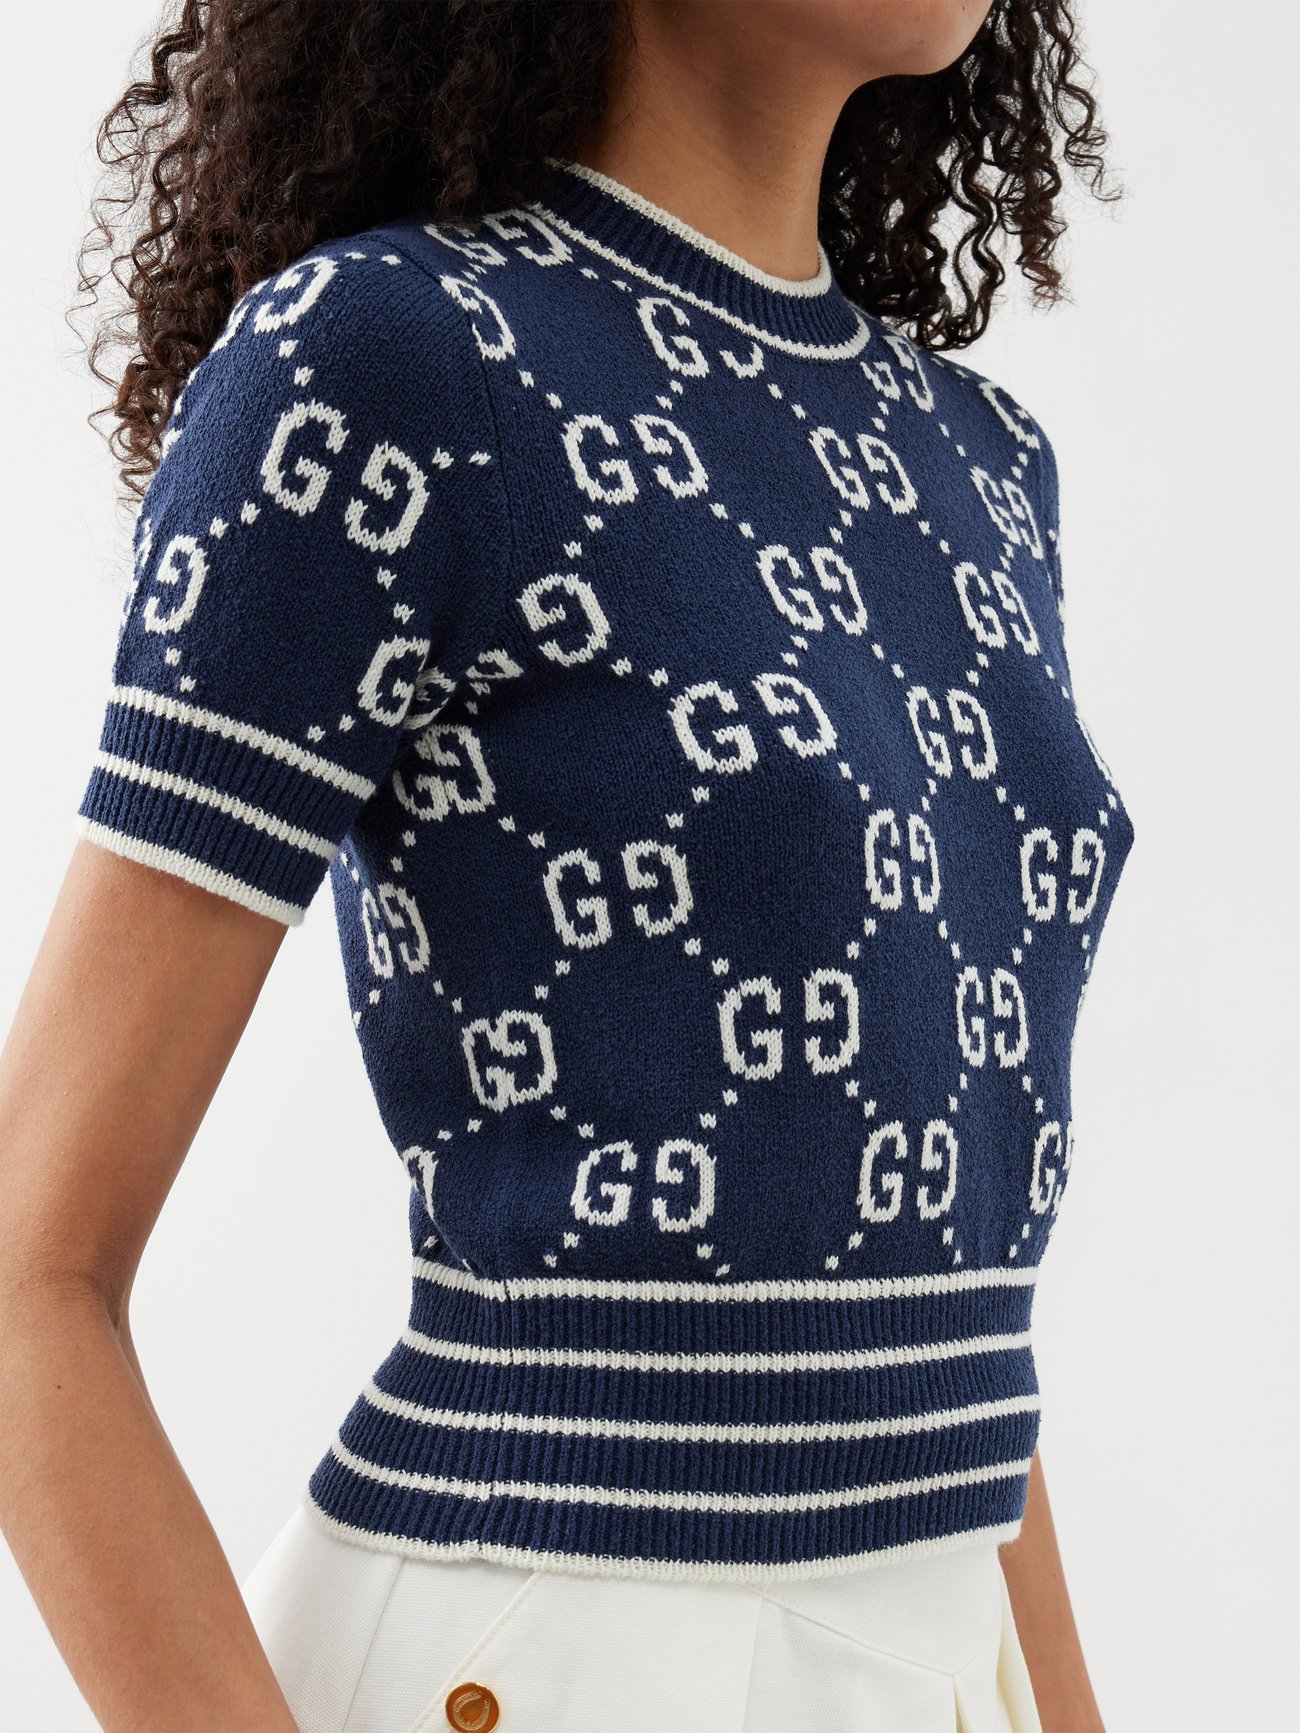 Gucci Double G Logo Jacquard Cropped Top